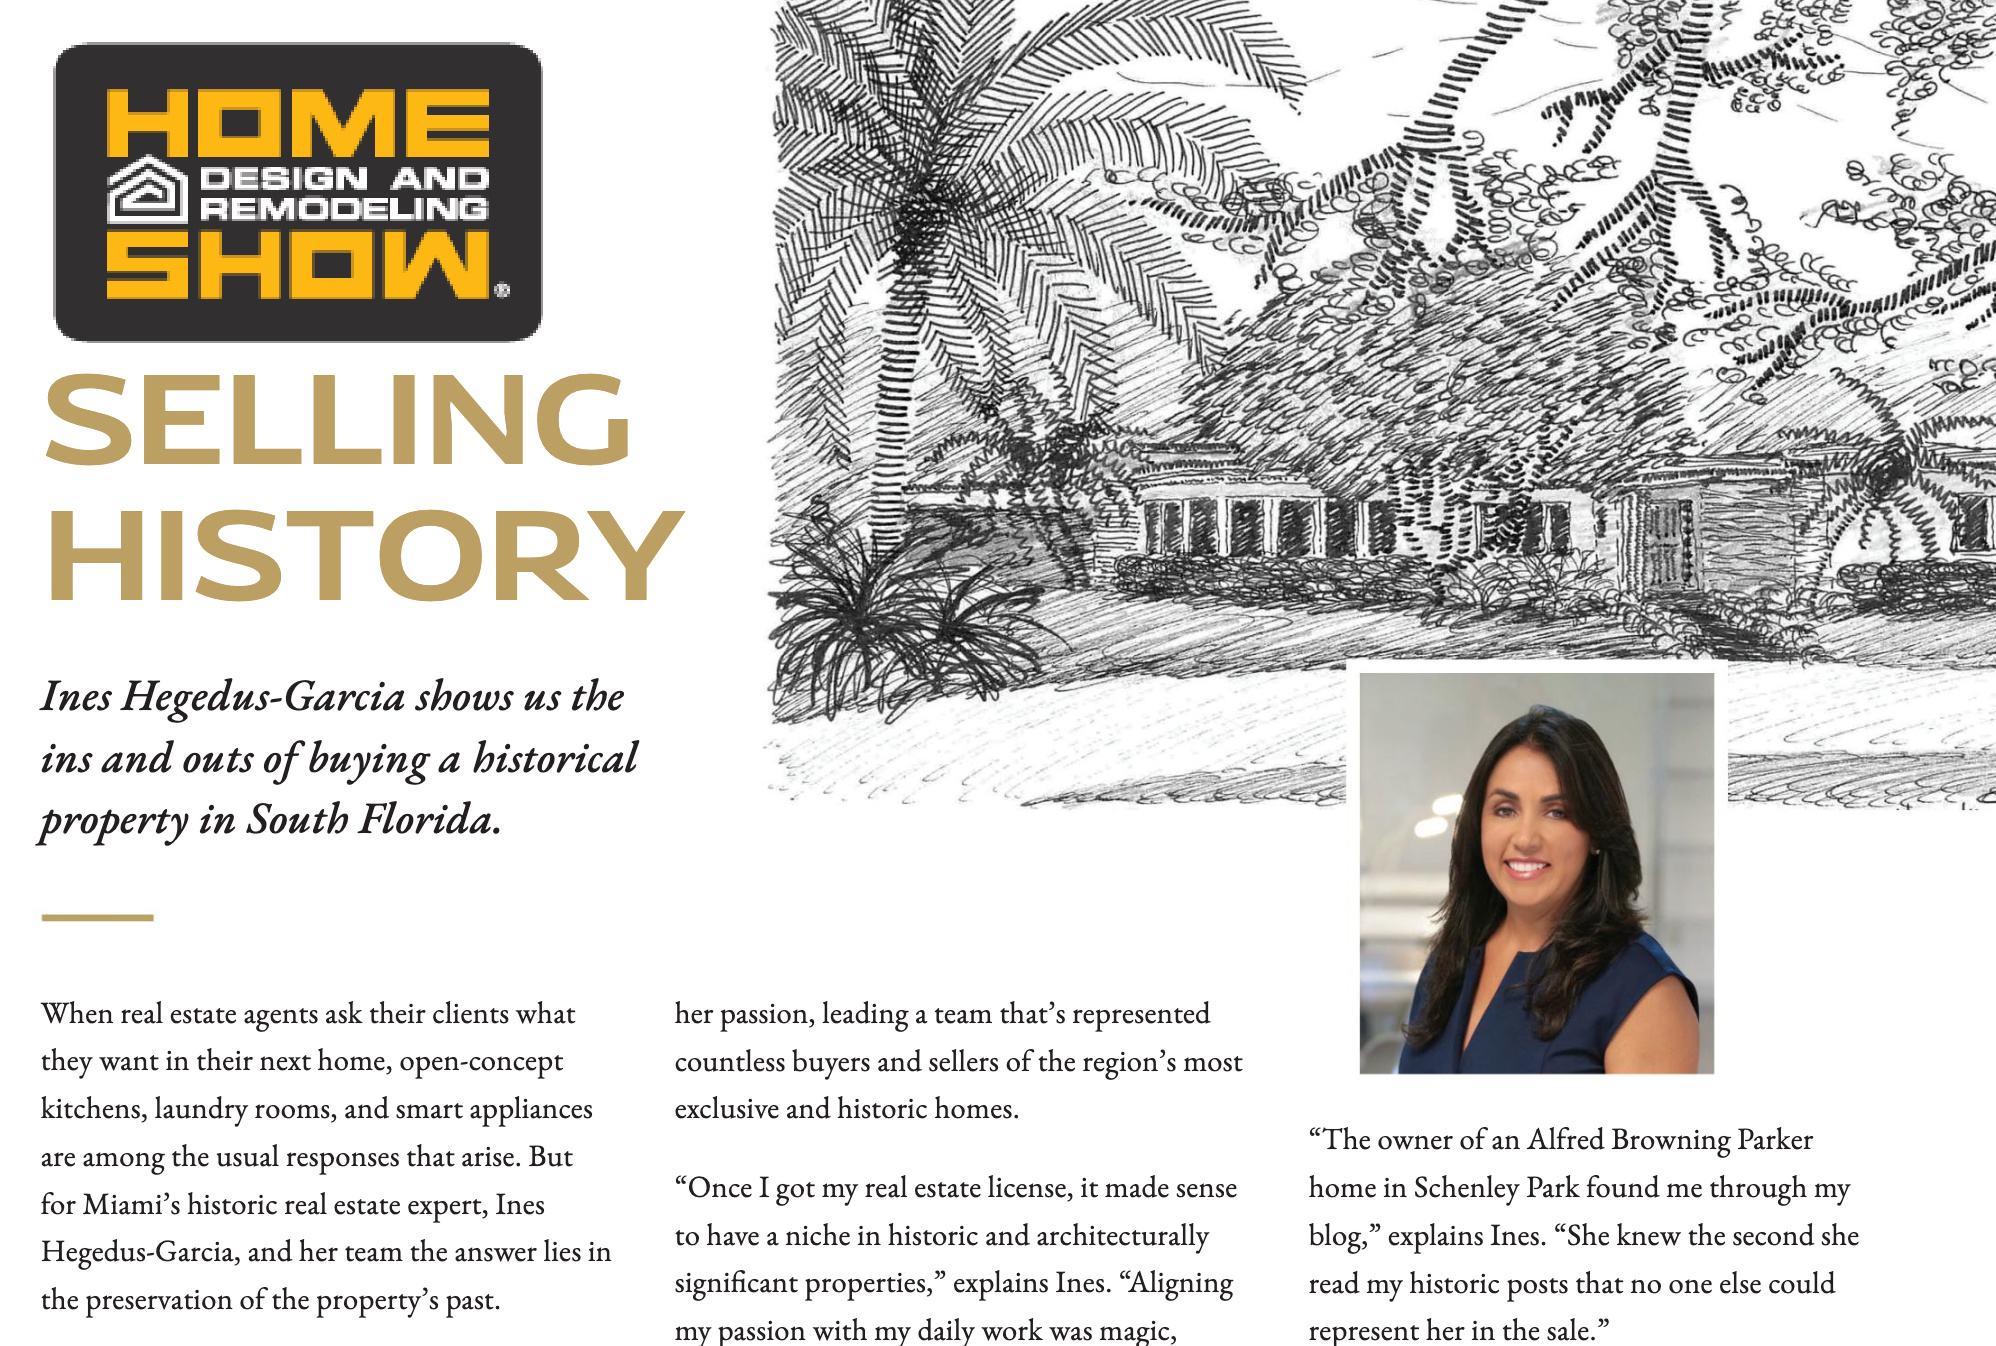 Home Design and Remodeling Magazine - features Ines Hegedus-Garcia